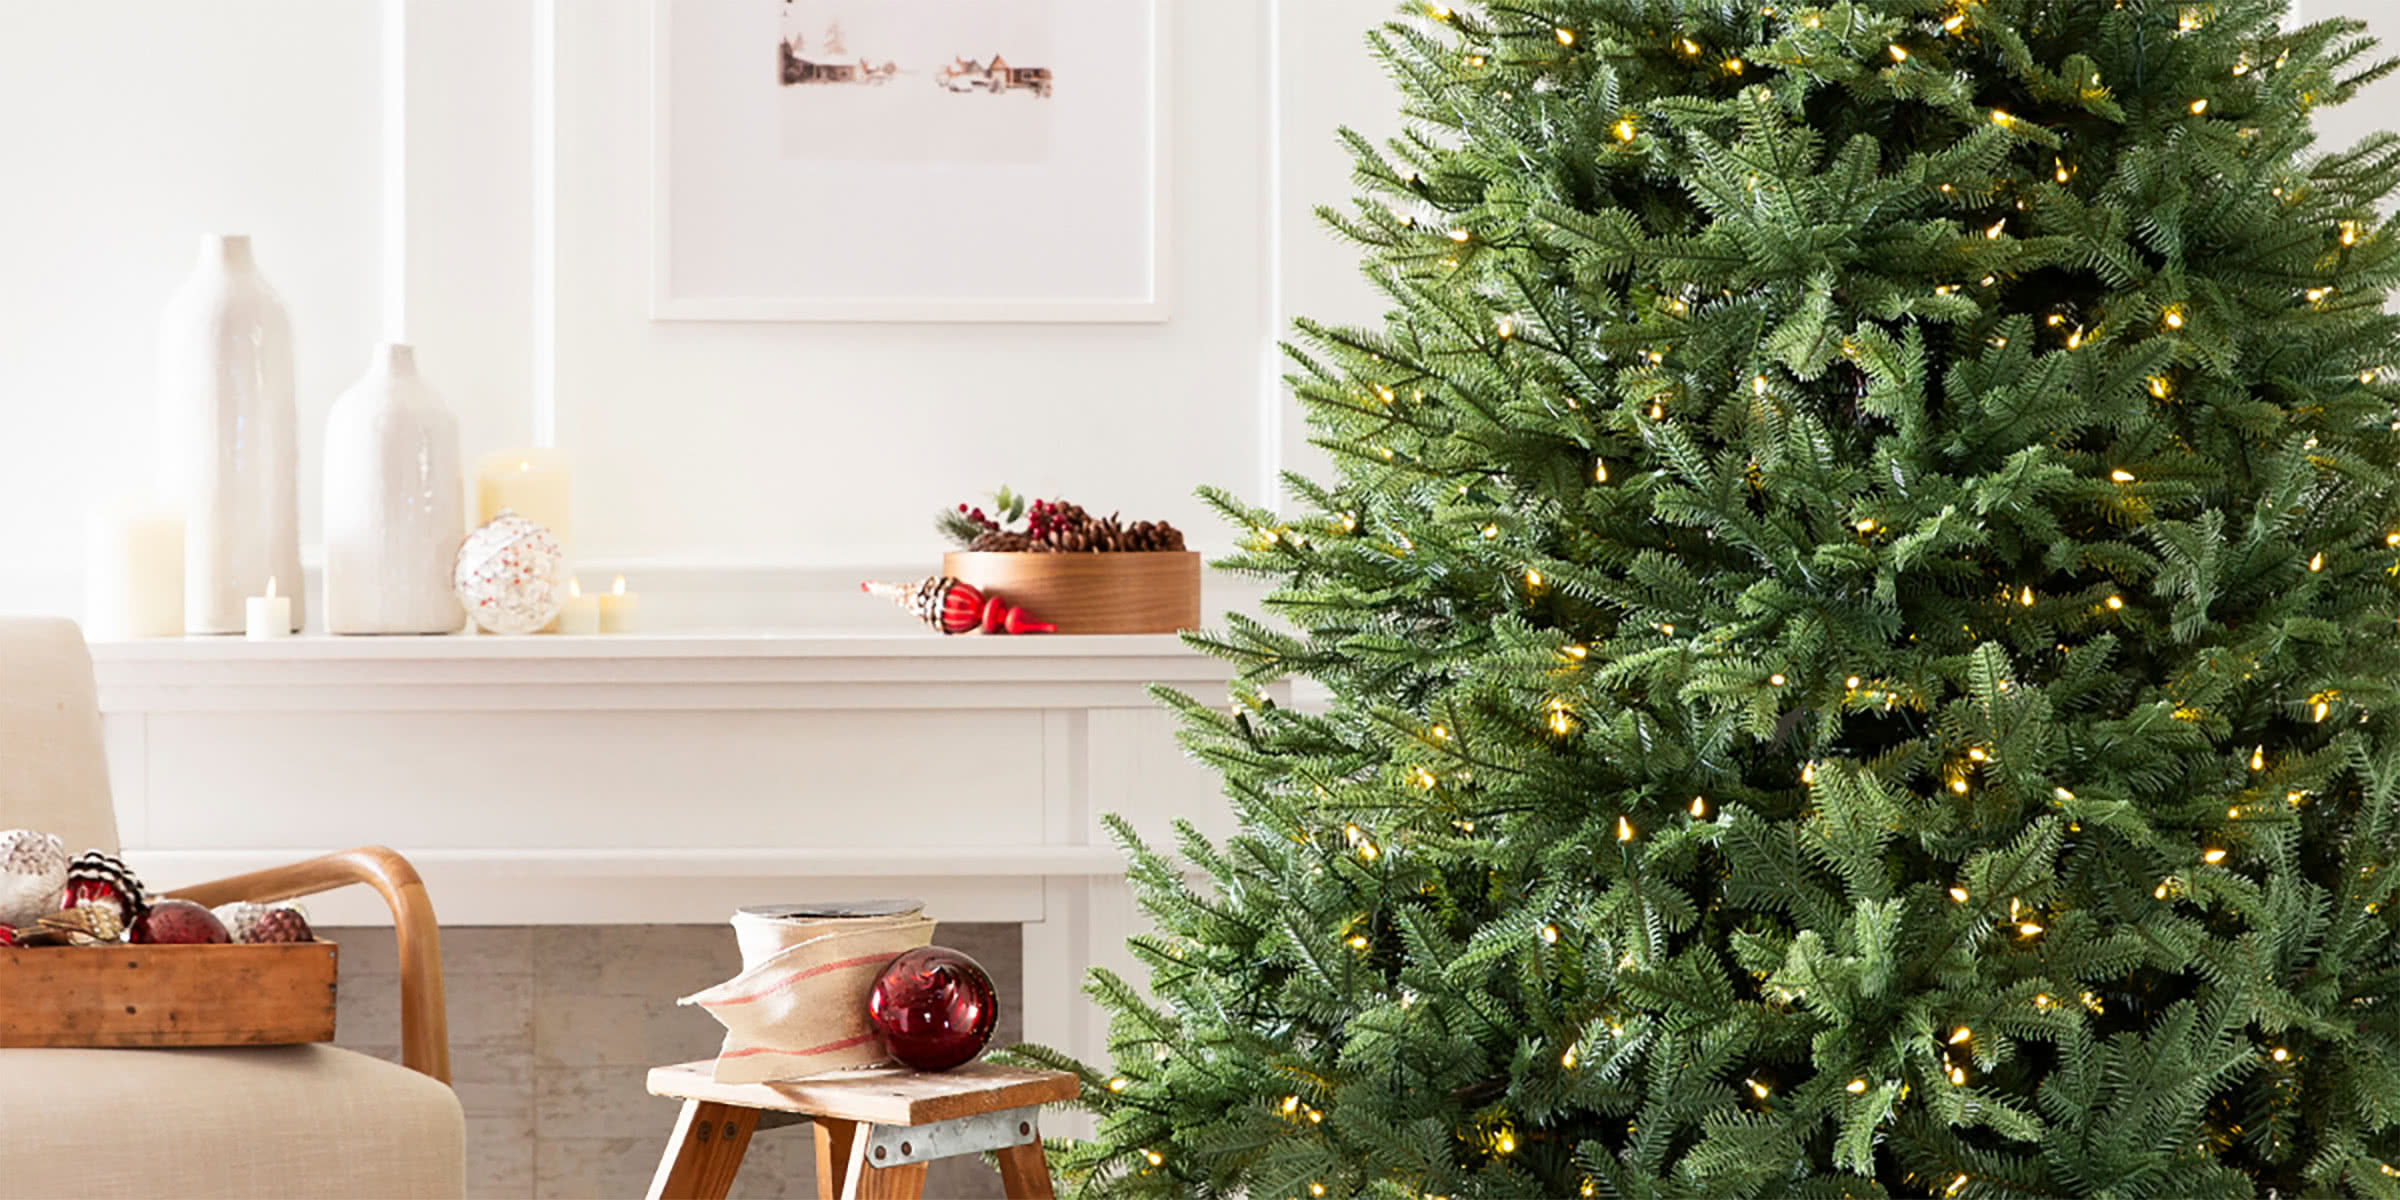 What artificial Christmas tree looks the most real?